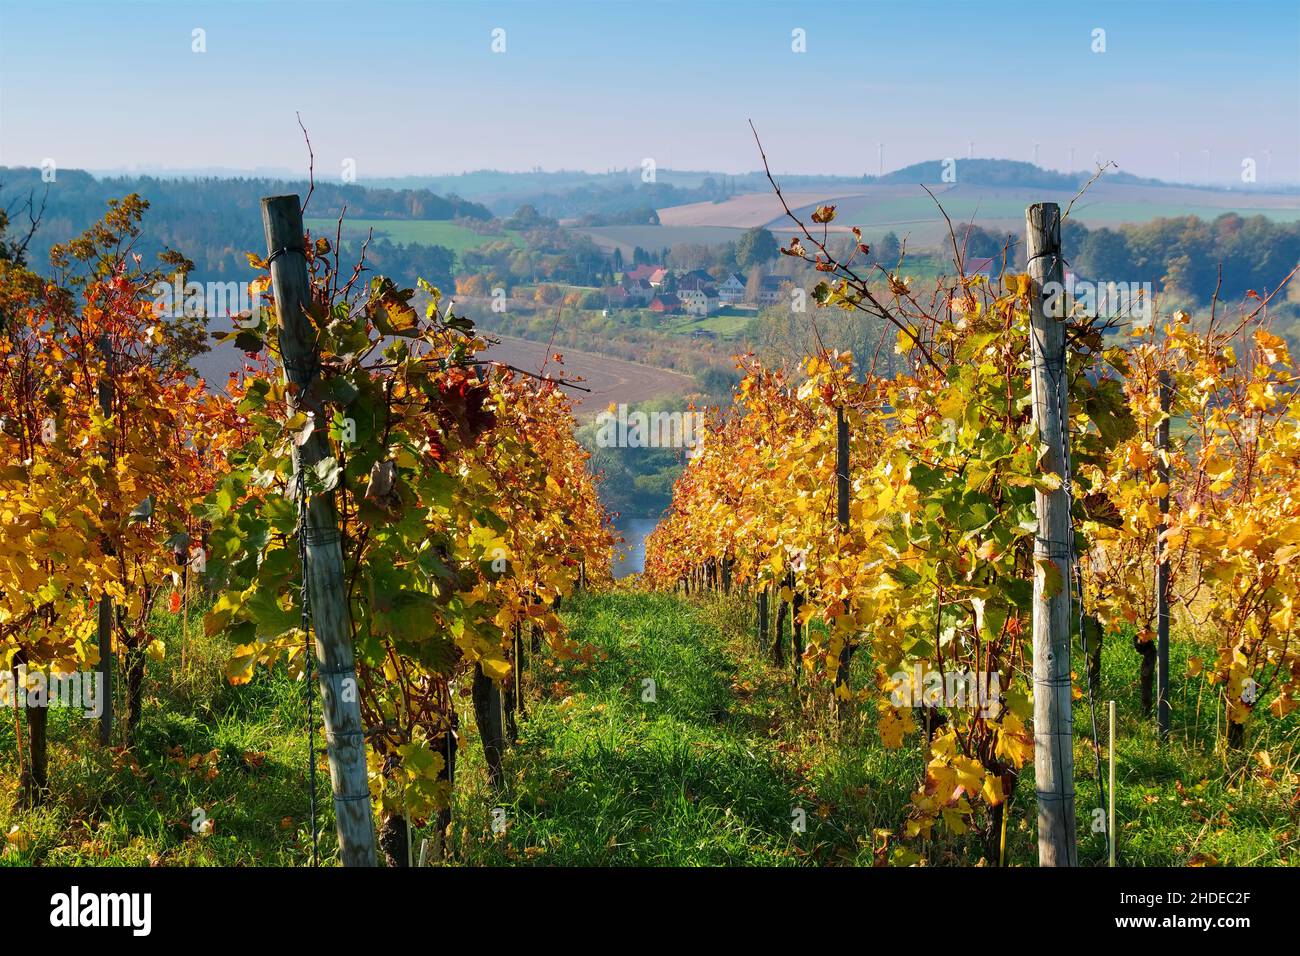 view over autumn vineyards near the river Elbe in Saxony, Germany Stock Photo